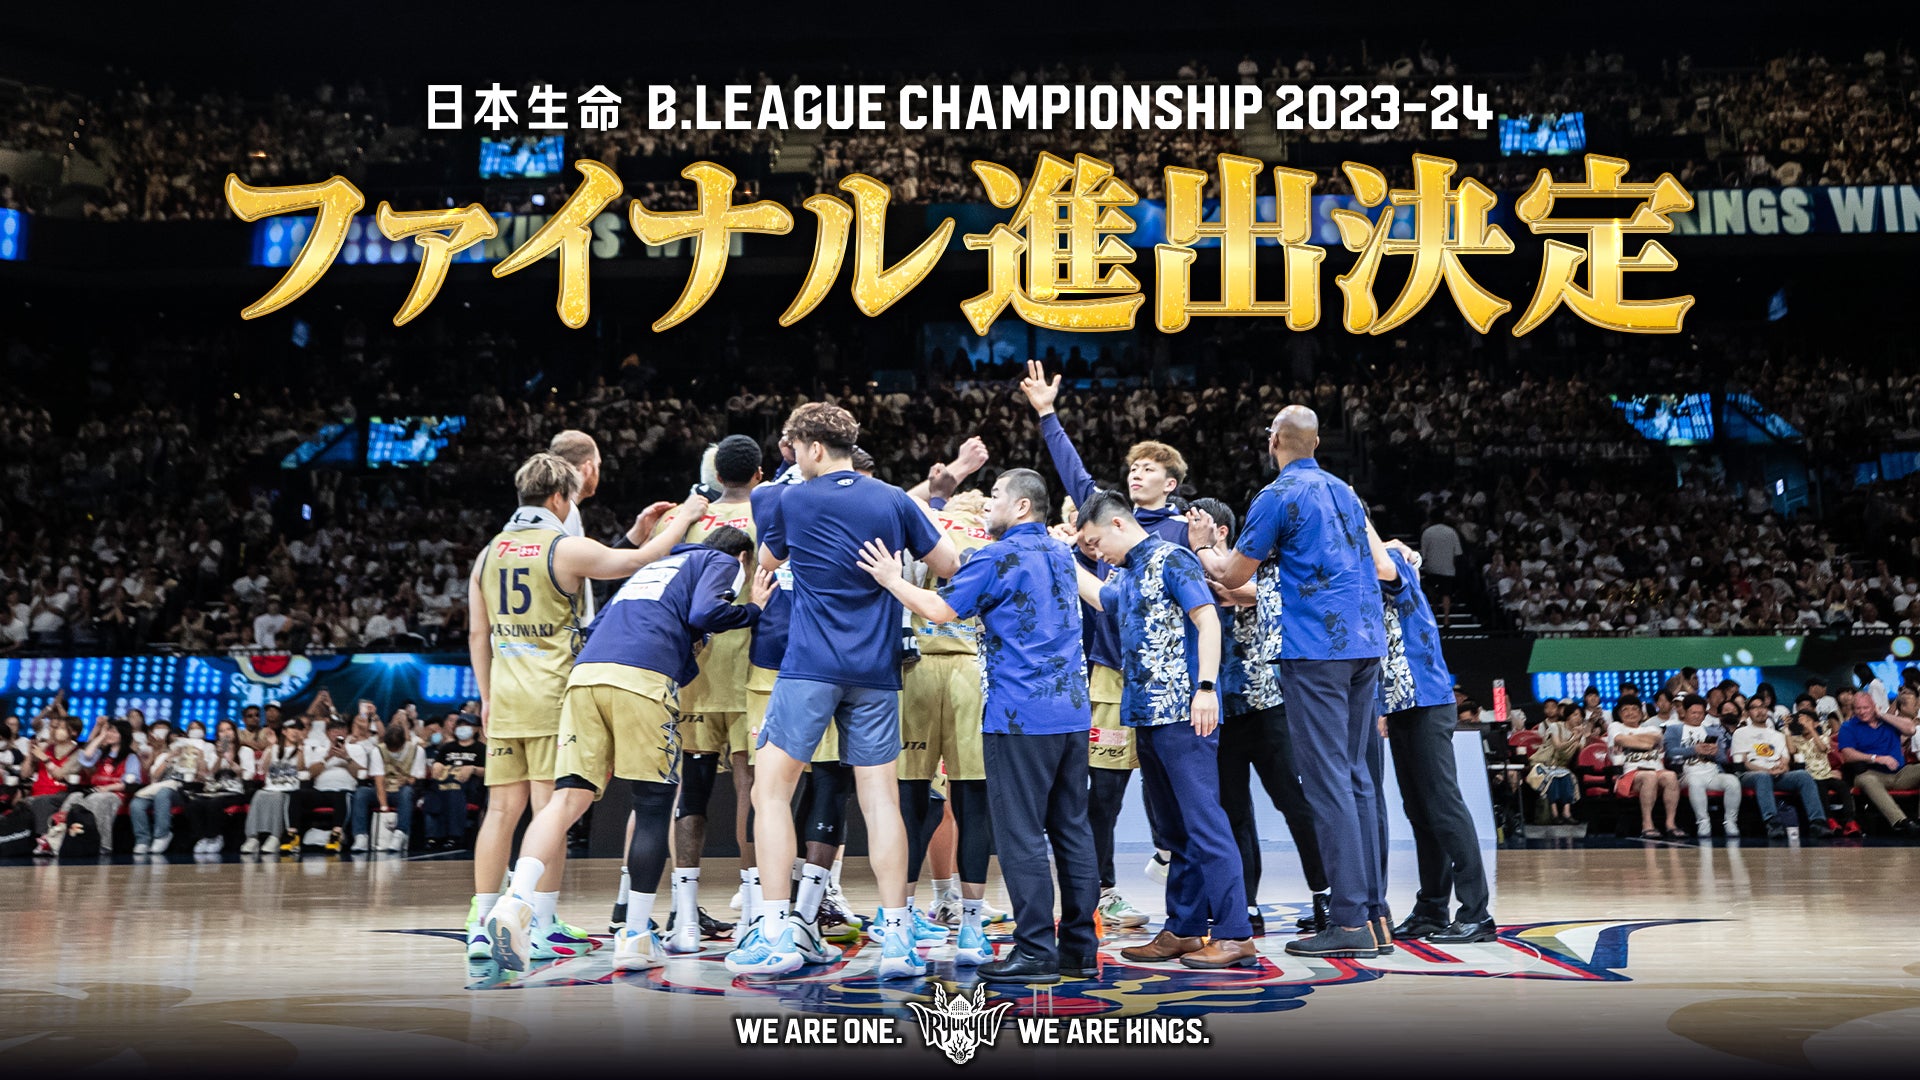 Nippon Life Insurance will advance to the EB.LEAGUE FINALS 2023-24!  |.  Ryukyu Golden Kings